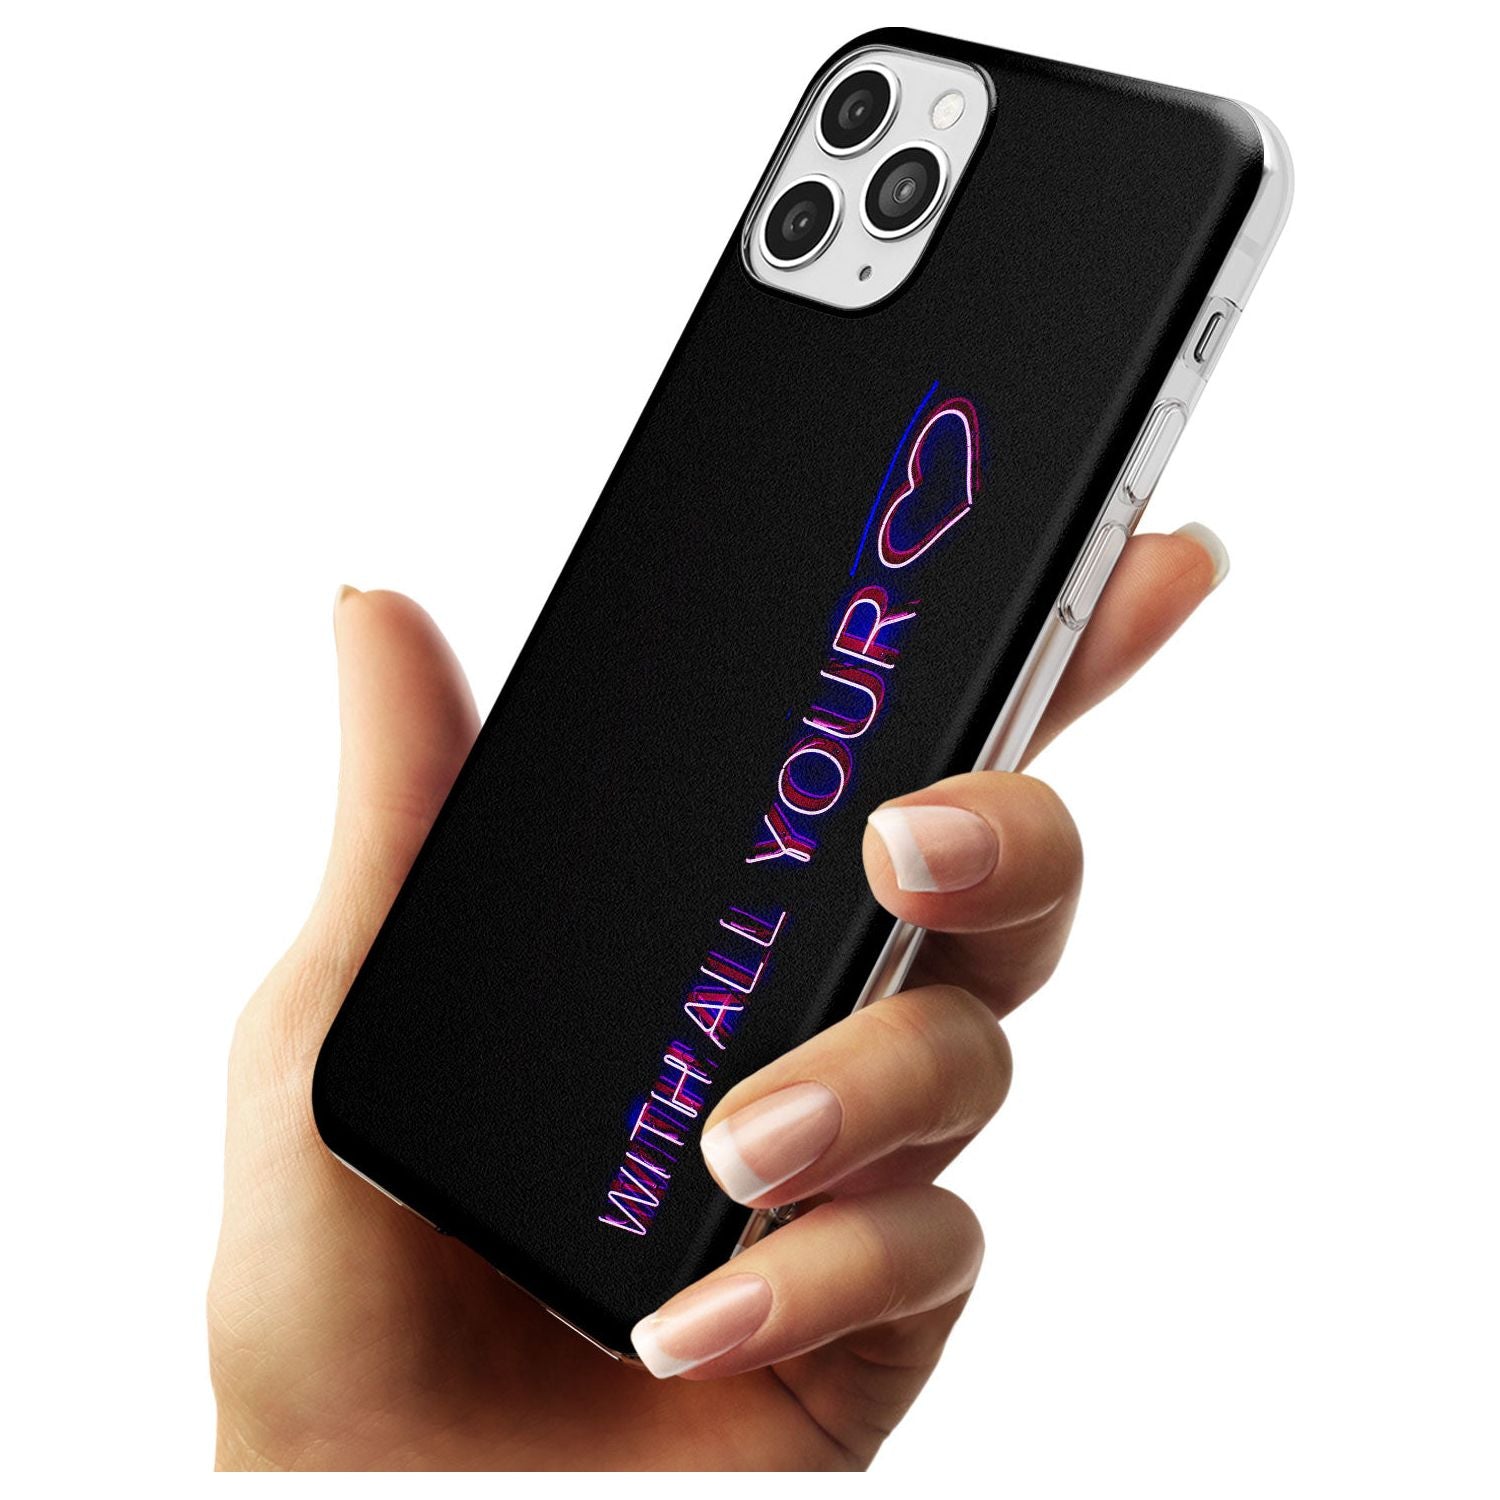 With All Your Heart Neon Sign Slim TPU Phone Case for iPhone 11 Pro Max